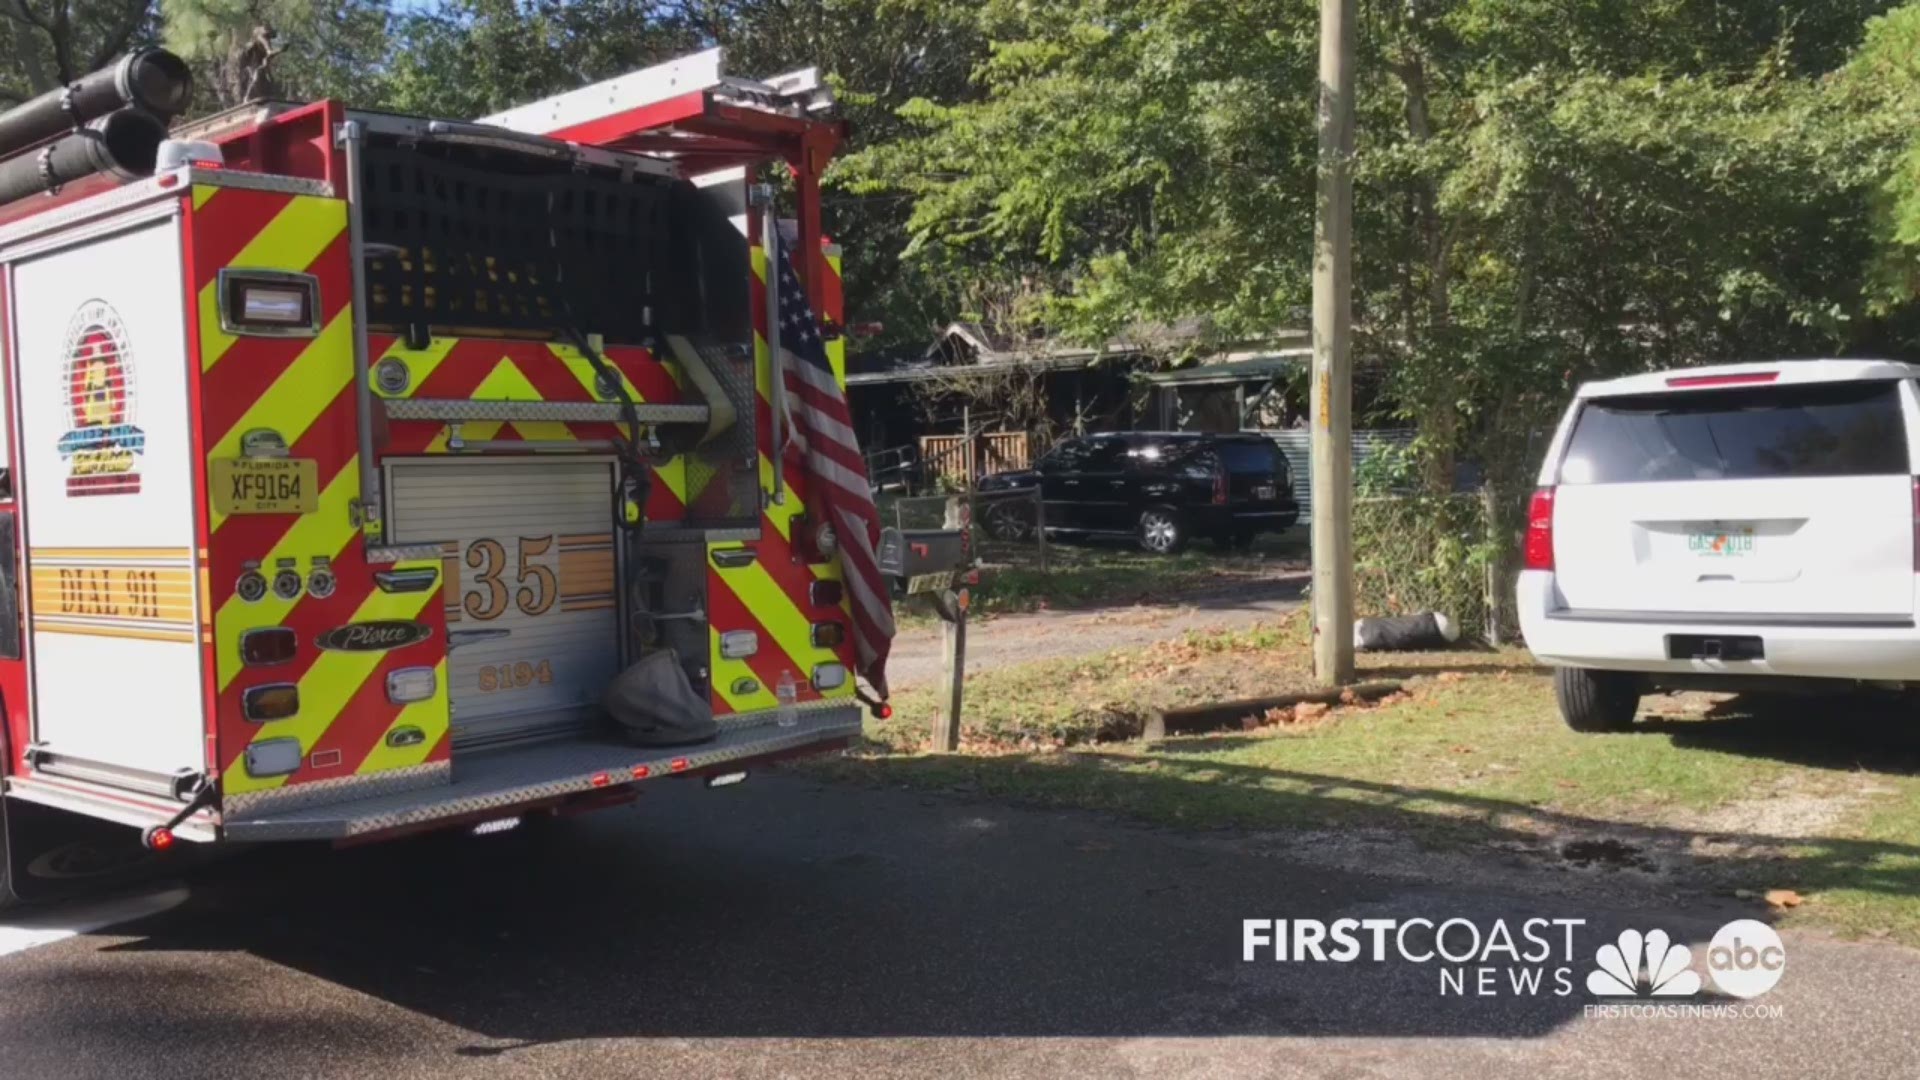 The Jacksonville Fire and Rescue Department said the fire occurred in a mobile home located in the  11200 block of Naomi Drive Saturday morning.